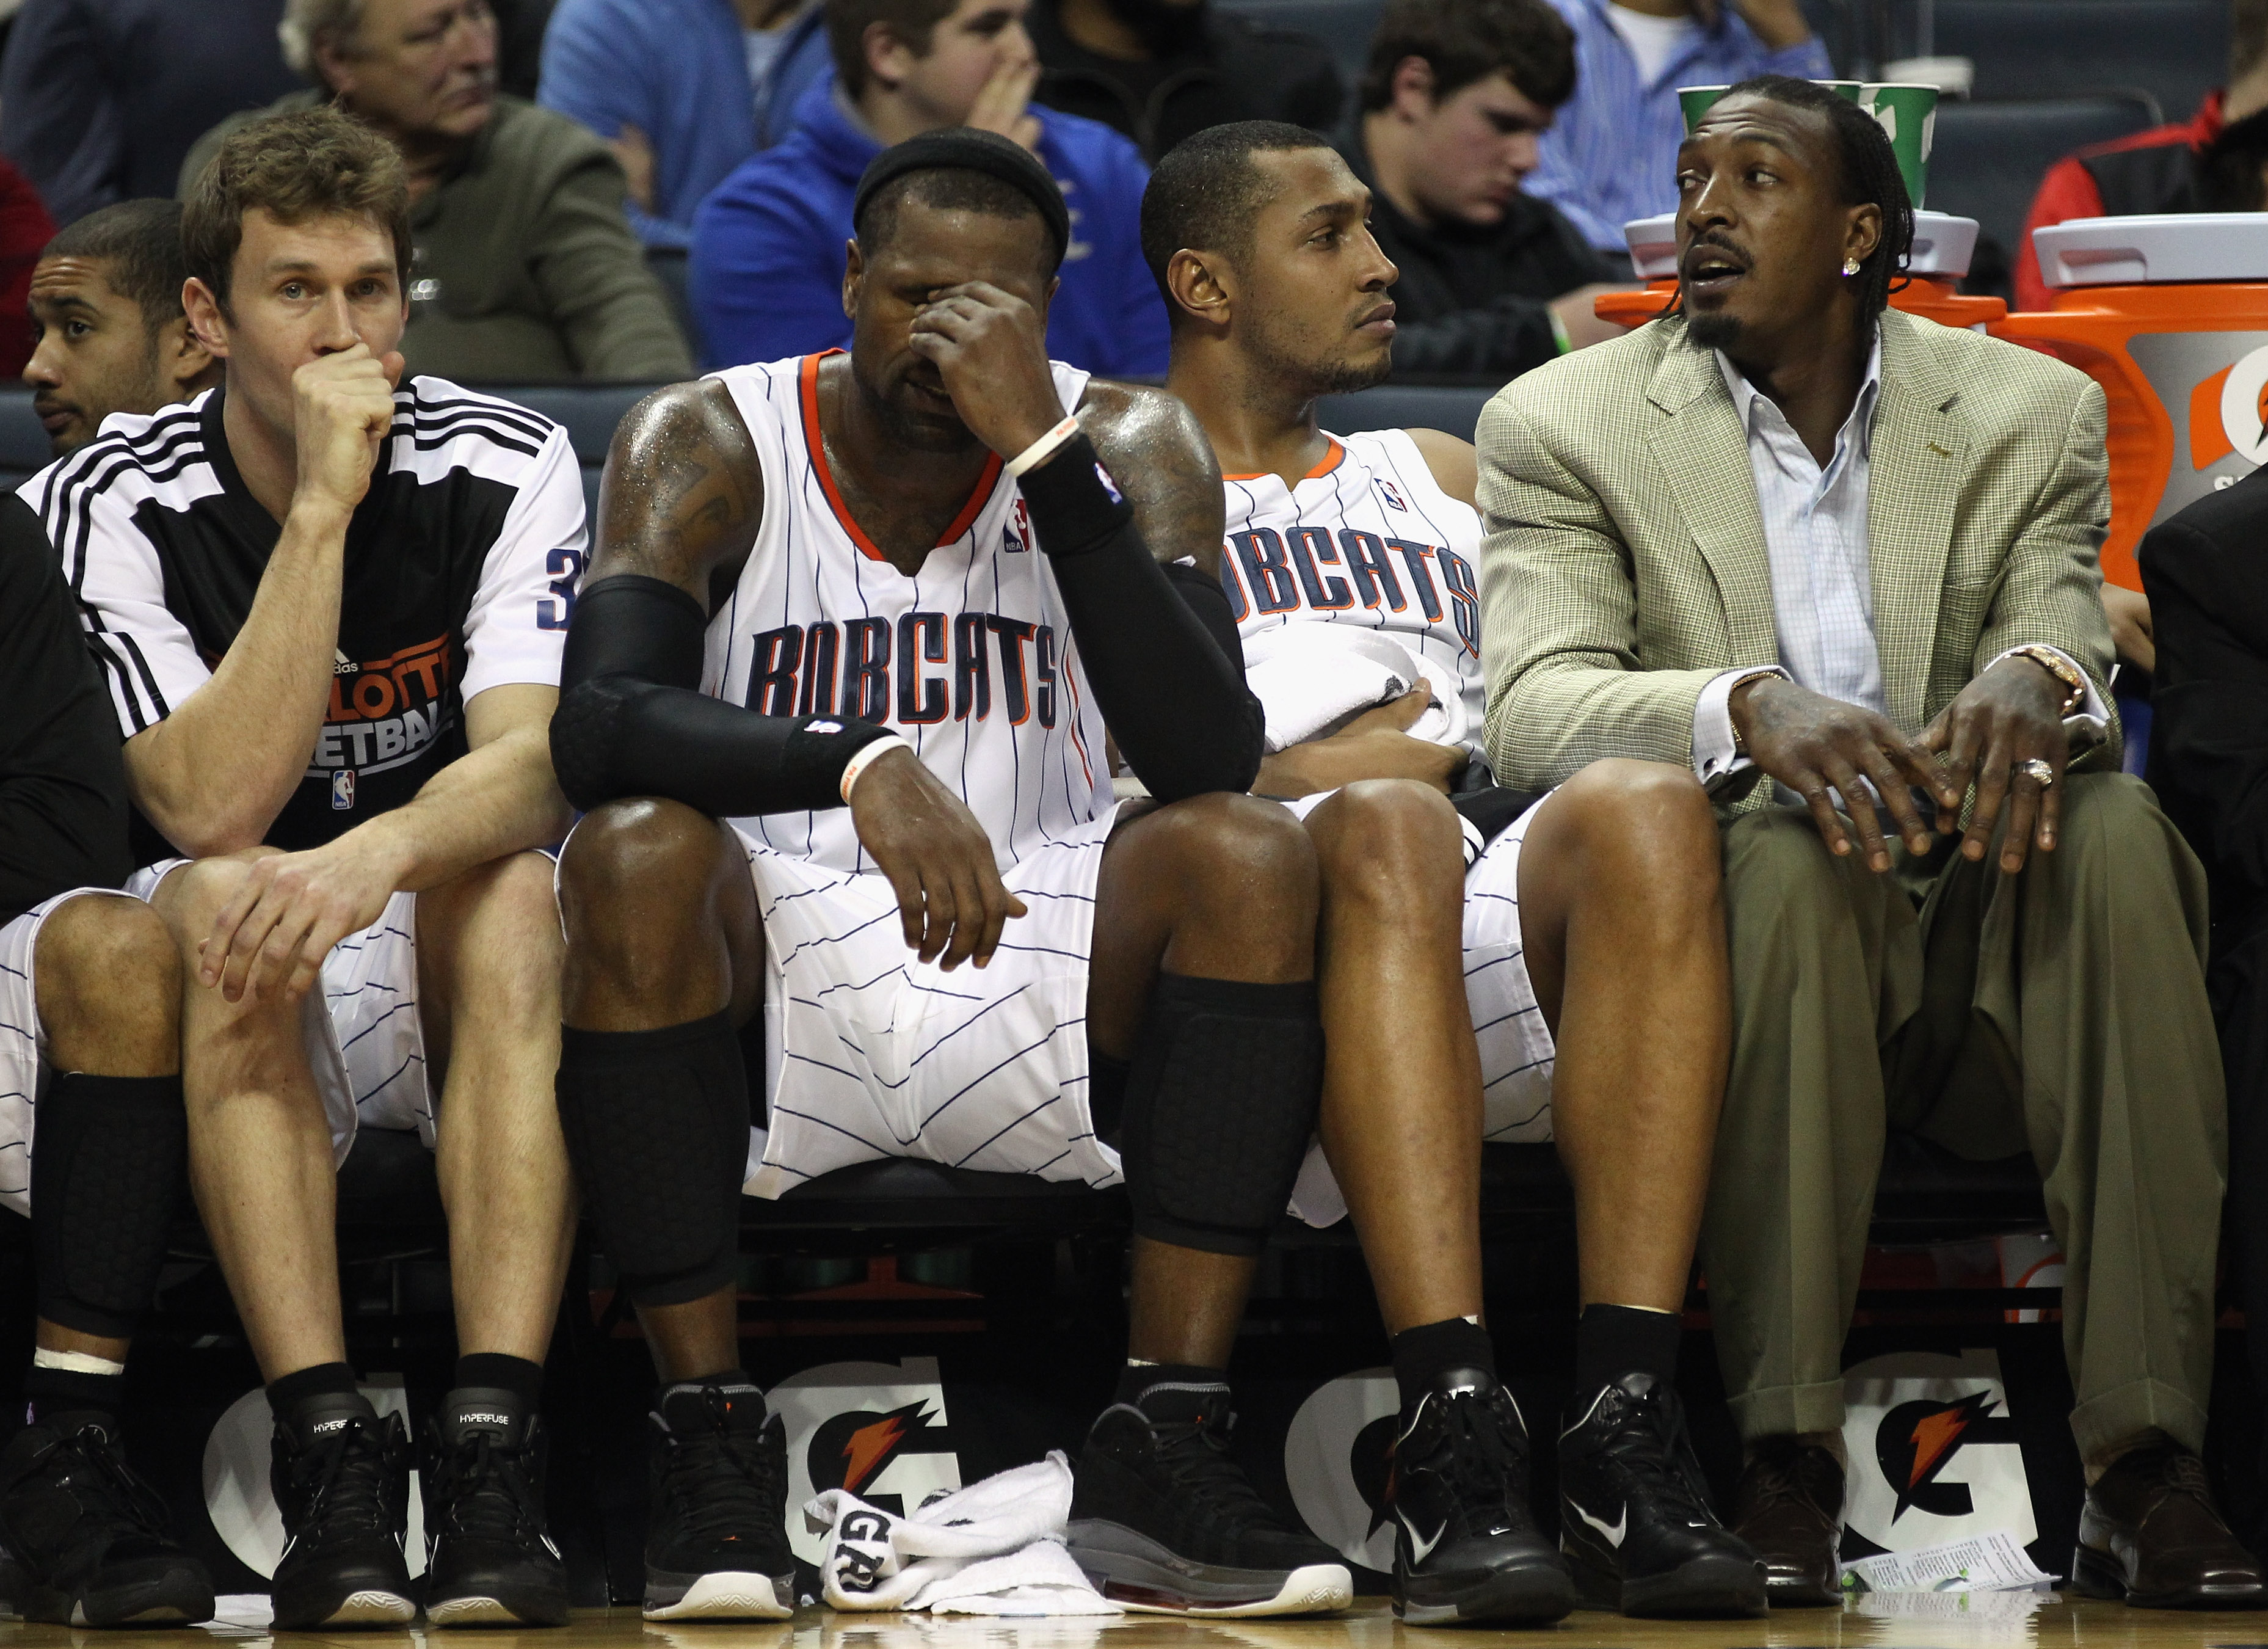 CHARLOTTE, NC - DECEMBER 21:  Teammates Matt Carroll #33, Stephen Jackson #1, Boris Diaw #32 and Gerald Wallace #3 of the Charlotte Bobcats sit on the bench during their 99-81 loss to the Oklahoma City Thunder at Time Warner Cable Arena on December 21, 20